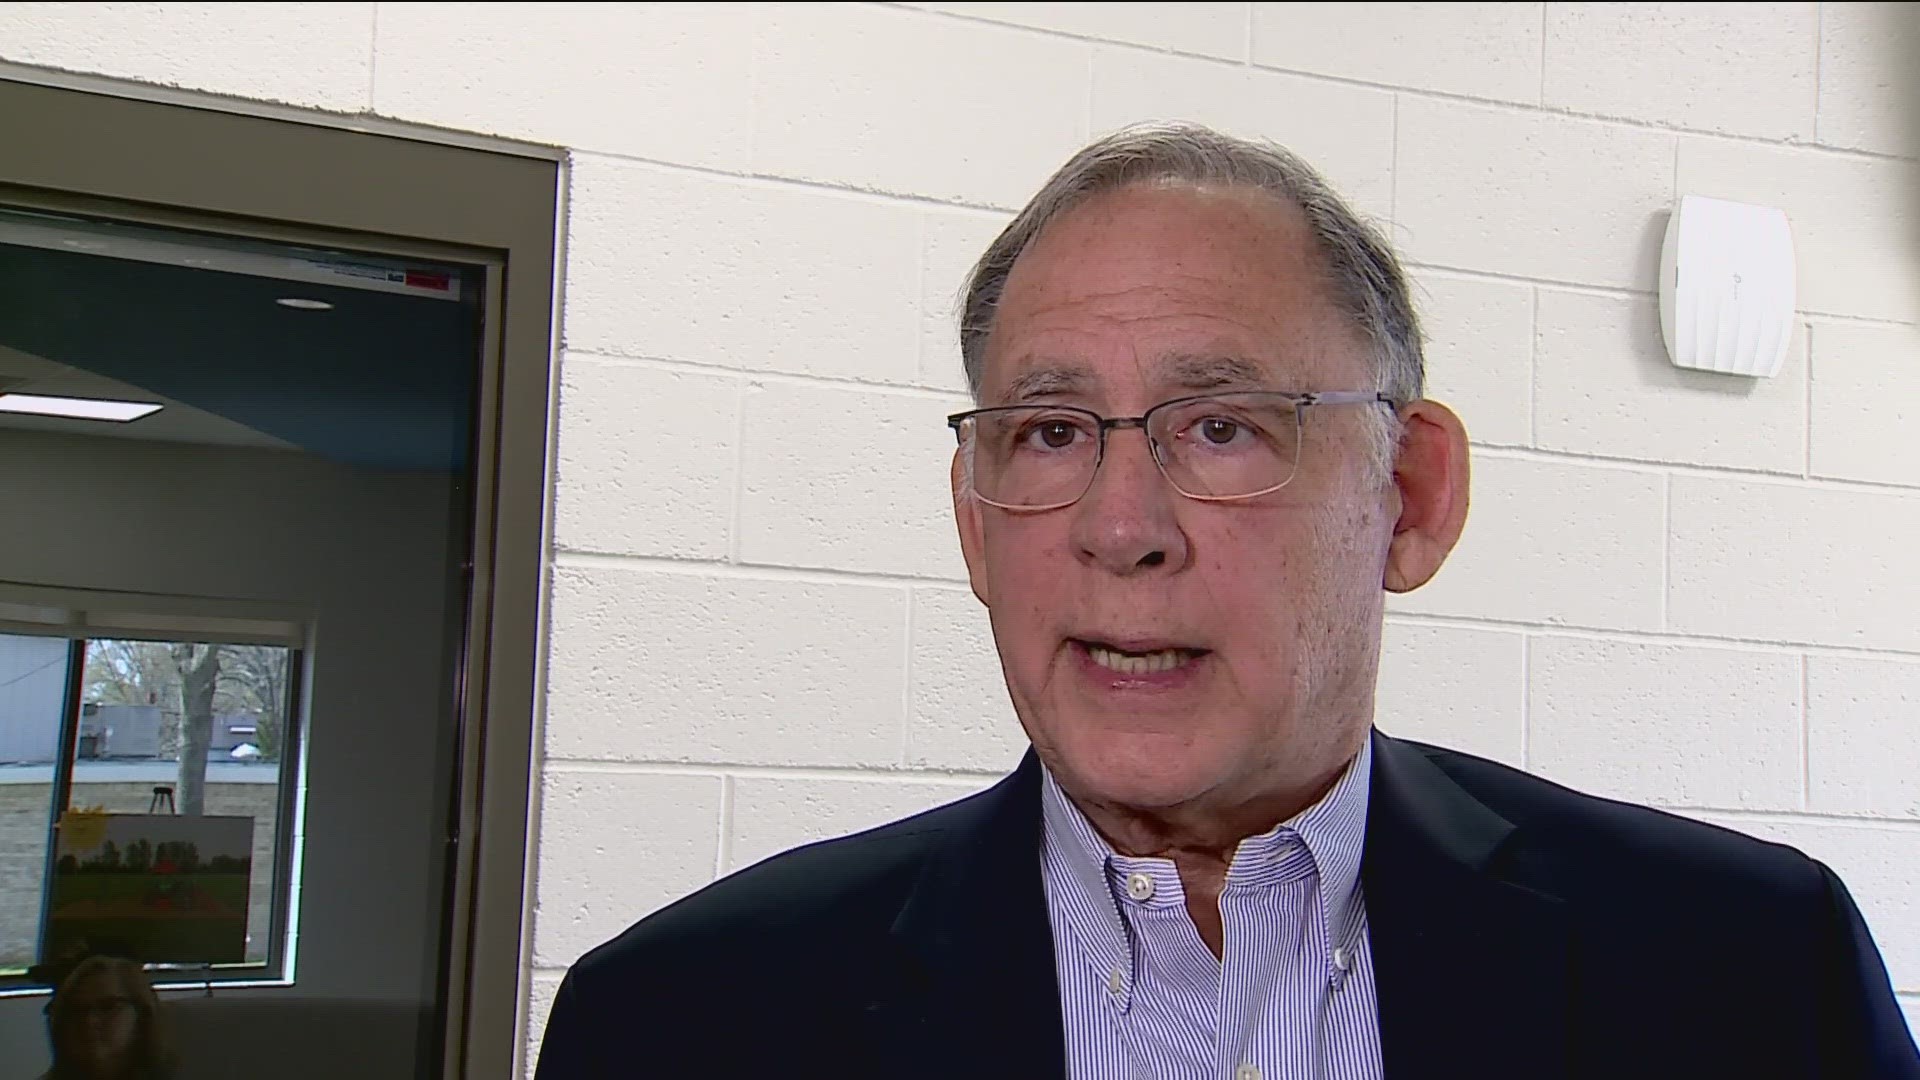 WE'RE HEARING TONIGHT FROM ARKANSAS SENATOR JOHN BOOZMAN - ABOUT NEW FUNDING THAT'S BEEN APPROVED FOR THE NEW MISSION AT THE 188TH IN FORT SMITH...